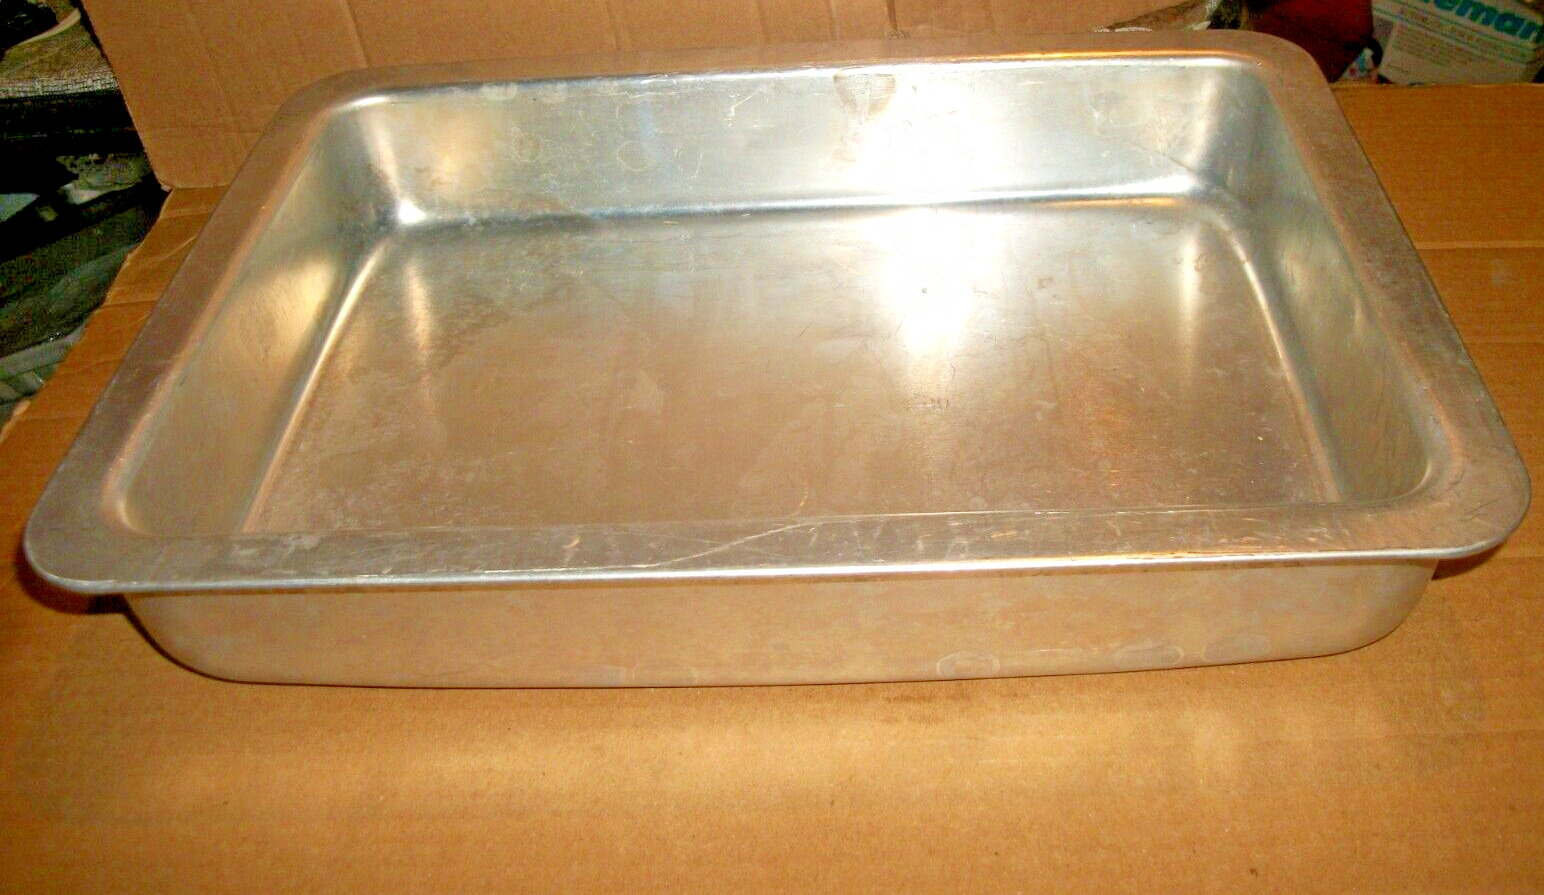 Vintage Wear-Ever Air Bake/Insulated Aluminum Cake/Brownie/Baking Pan 13X9